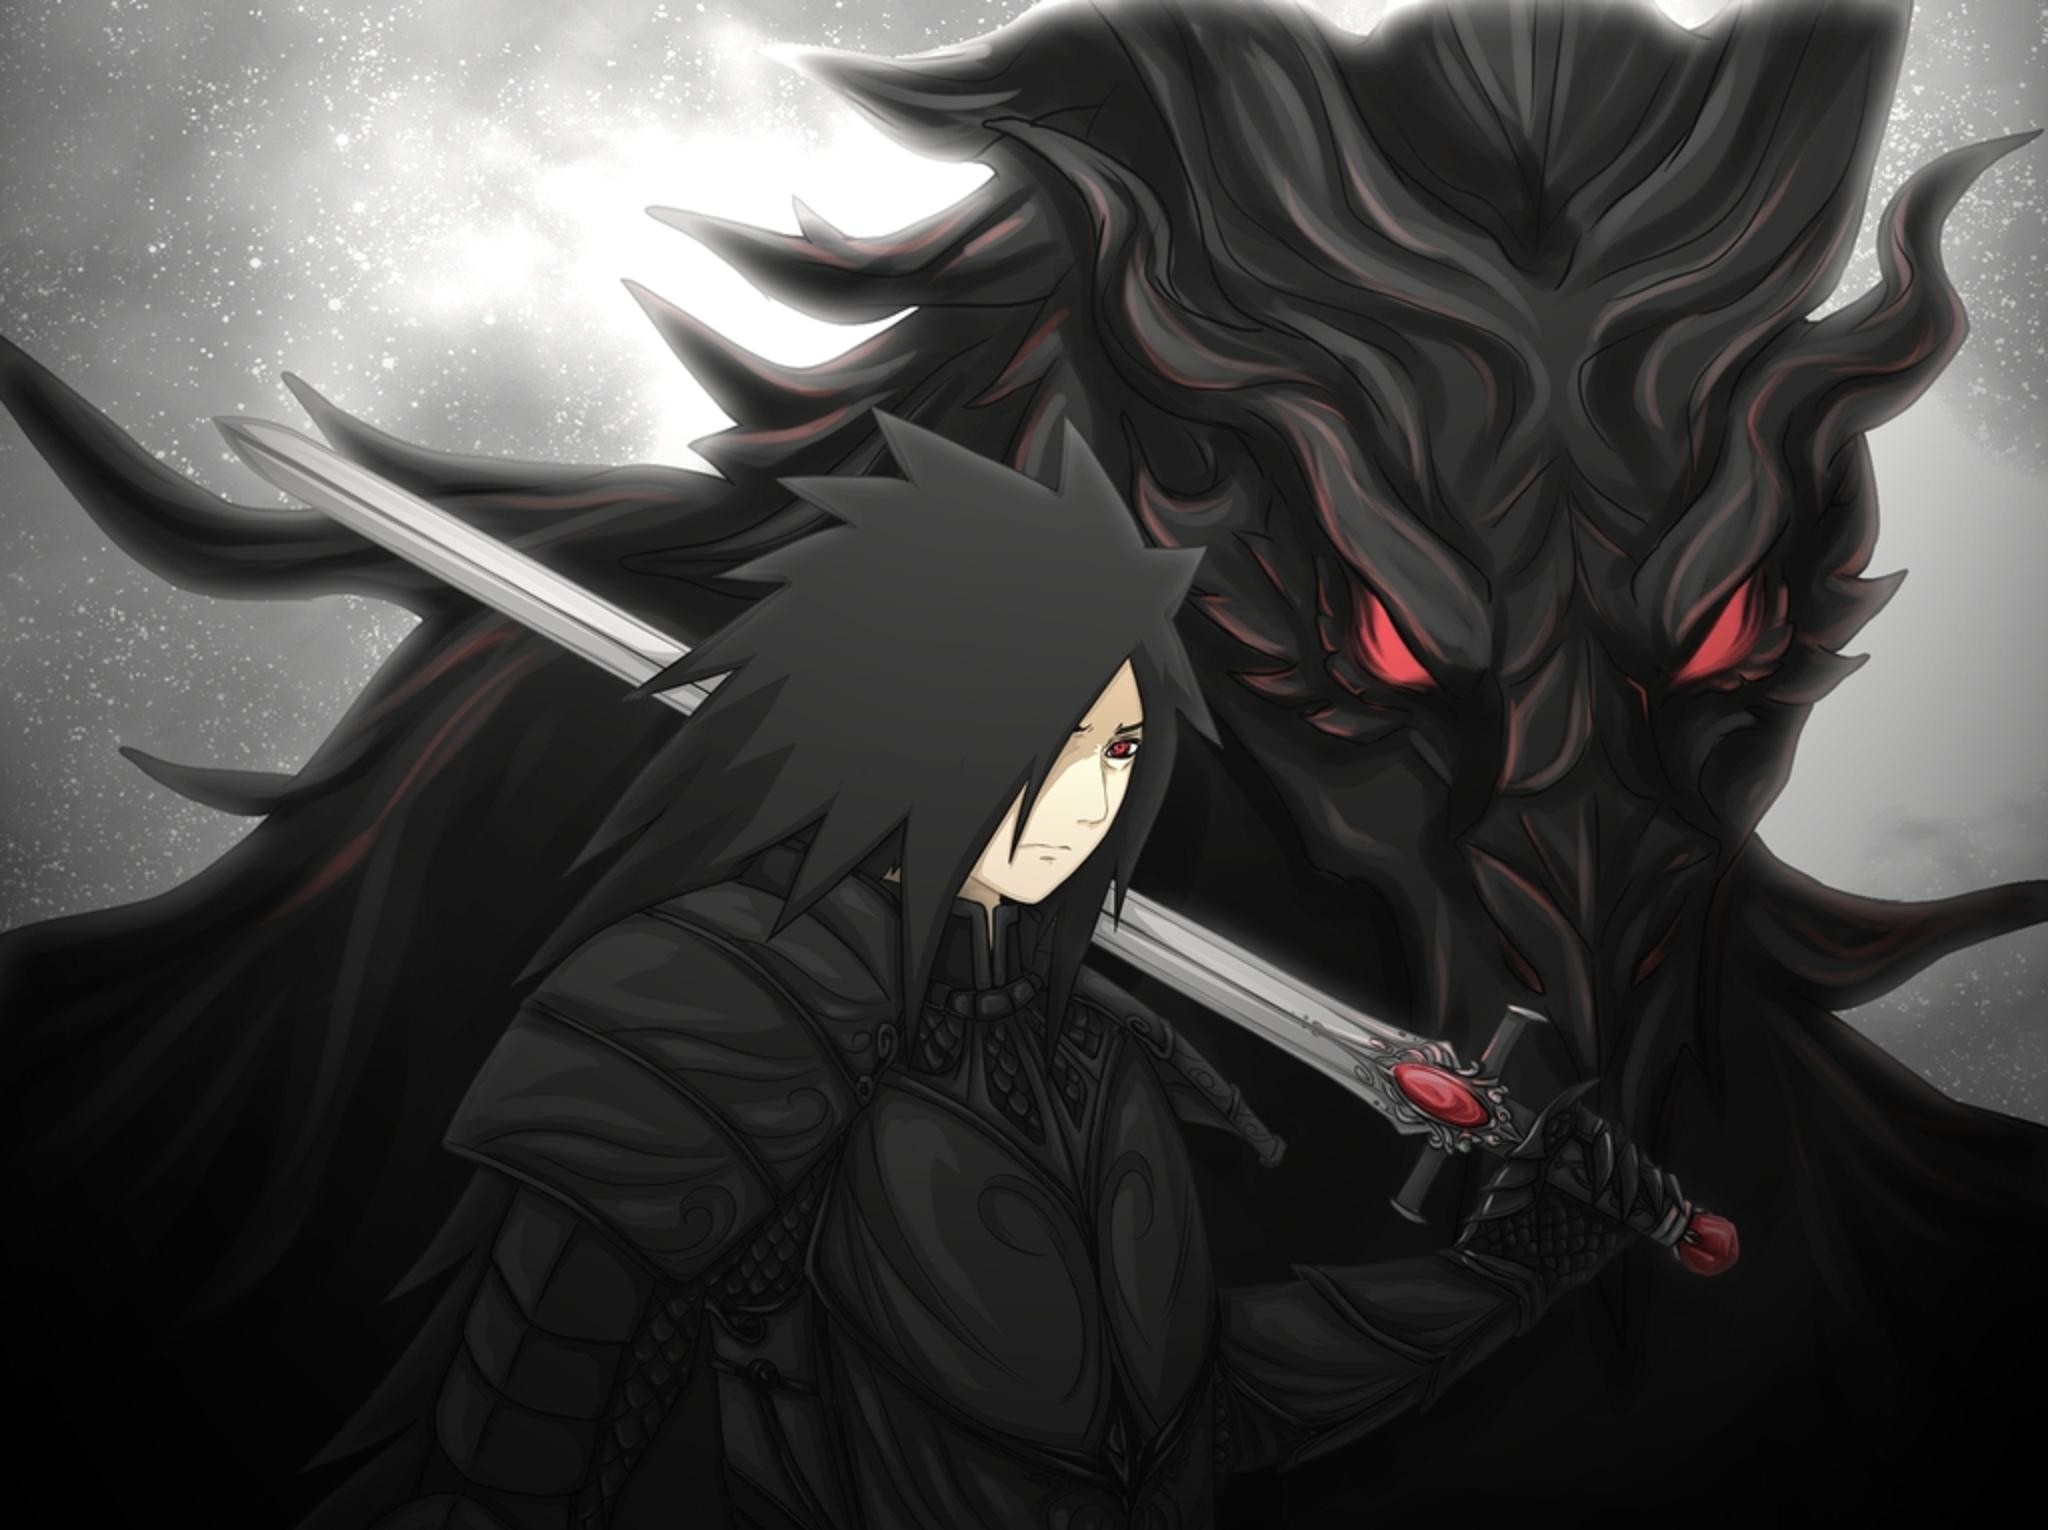 83 Uchiha Madara Wallpapers for iPhone and Android by Christopher Gilbert